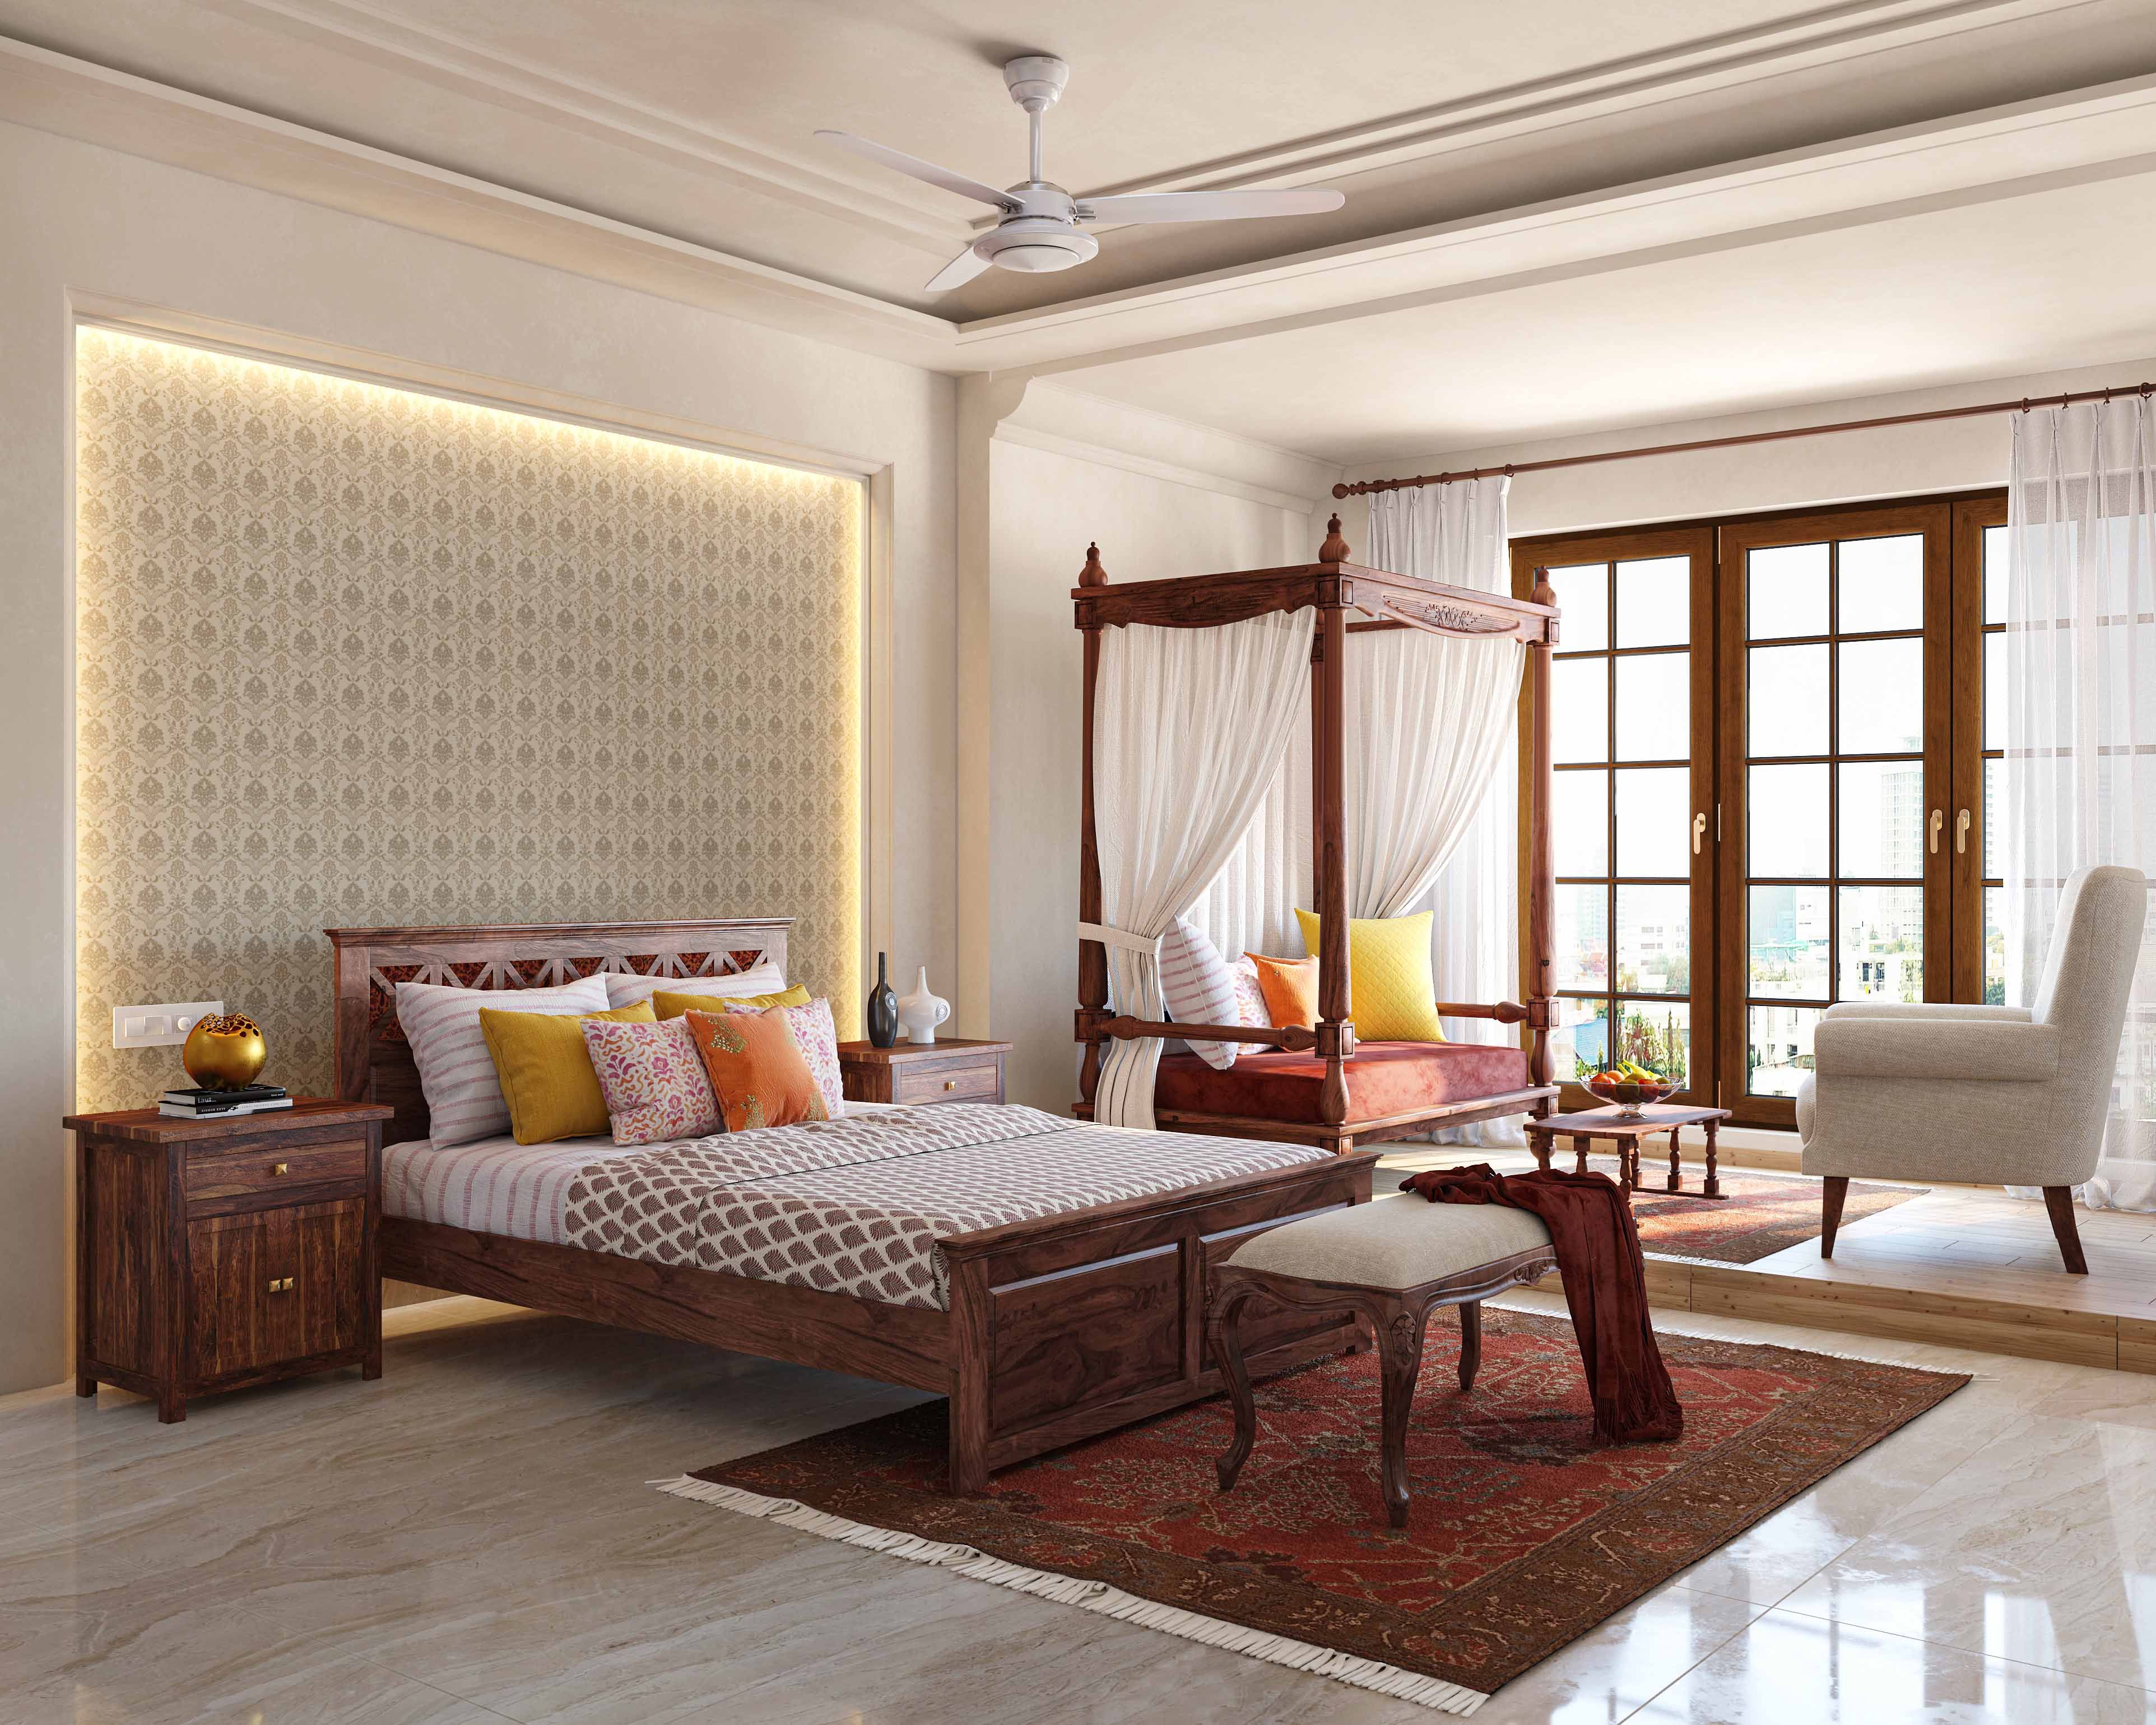 Traditional Master Bedroom Design With Beige Damask Wallpaper And Wooden Furntiture